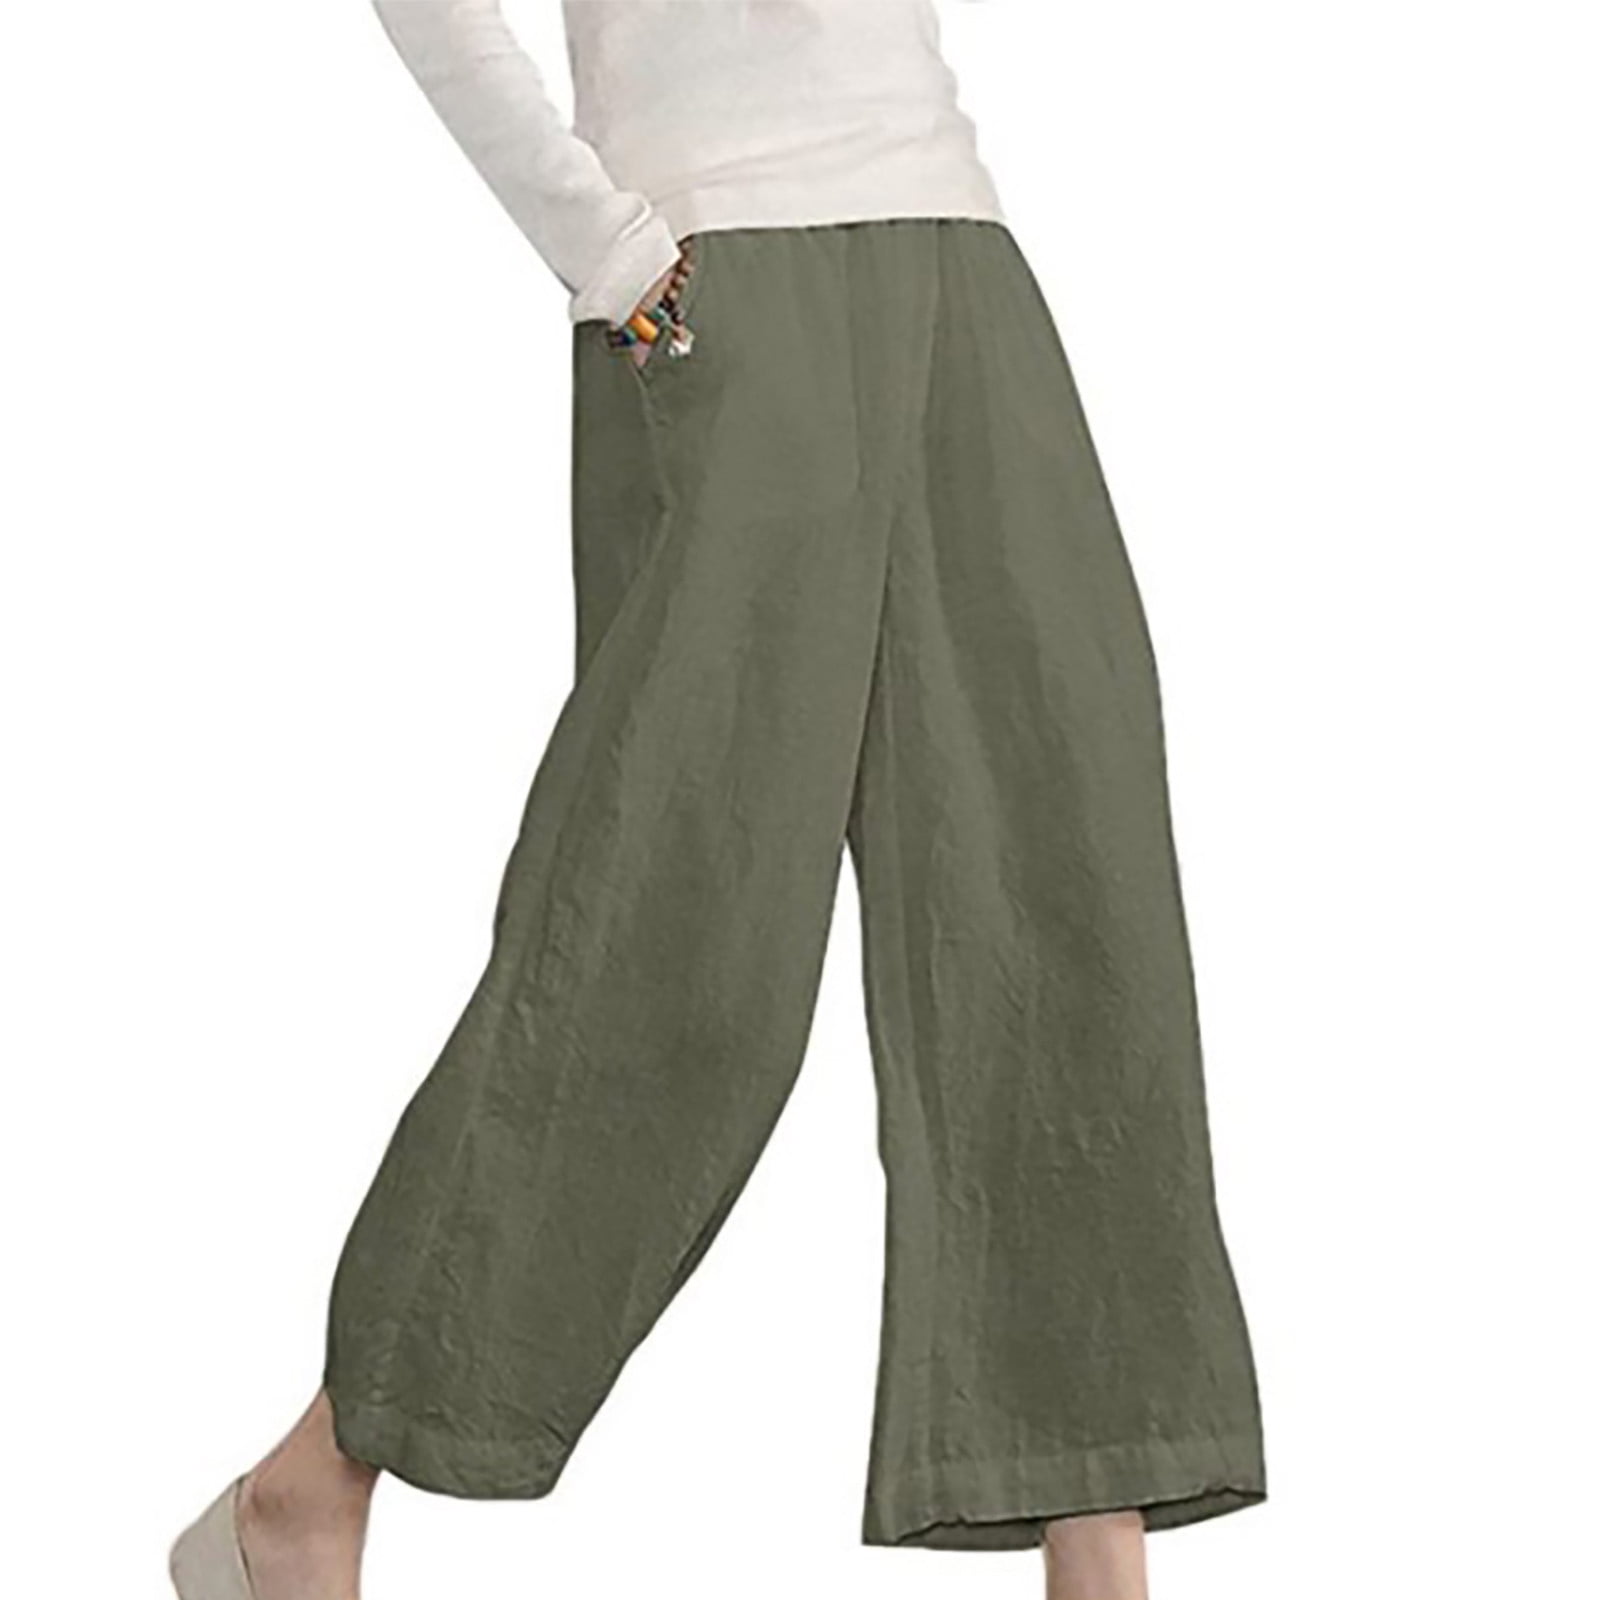 Lastesso Womens Solid Capris Cropped Pants High Waisted Wide Leg Cotton ...